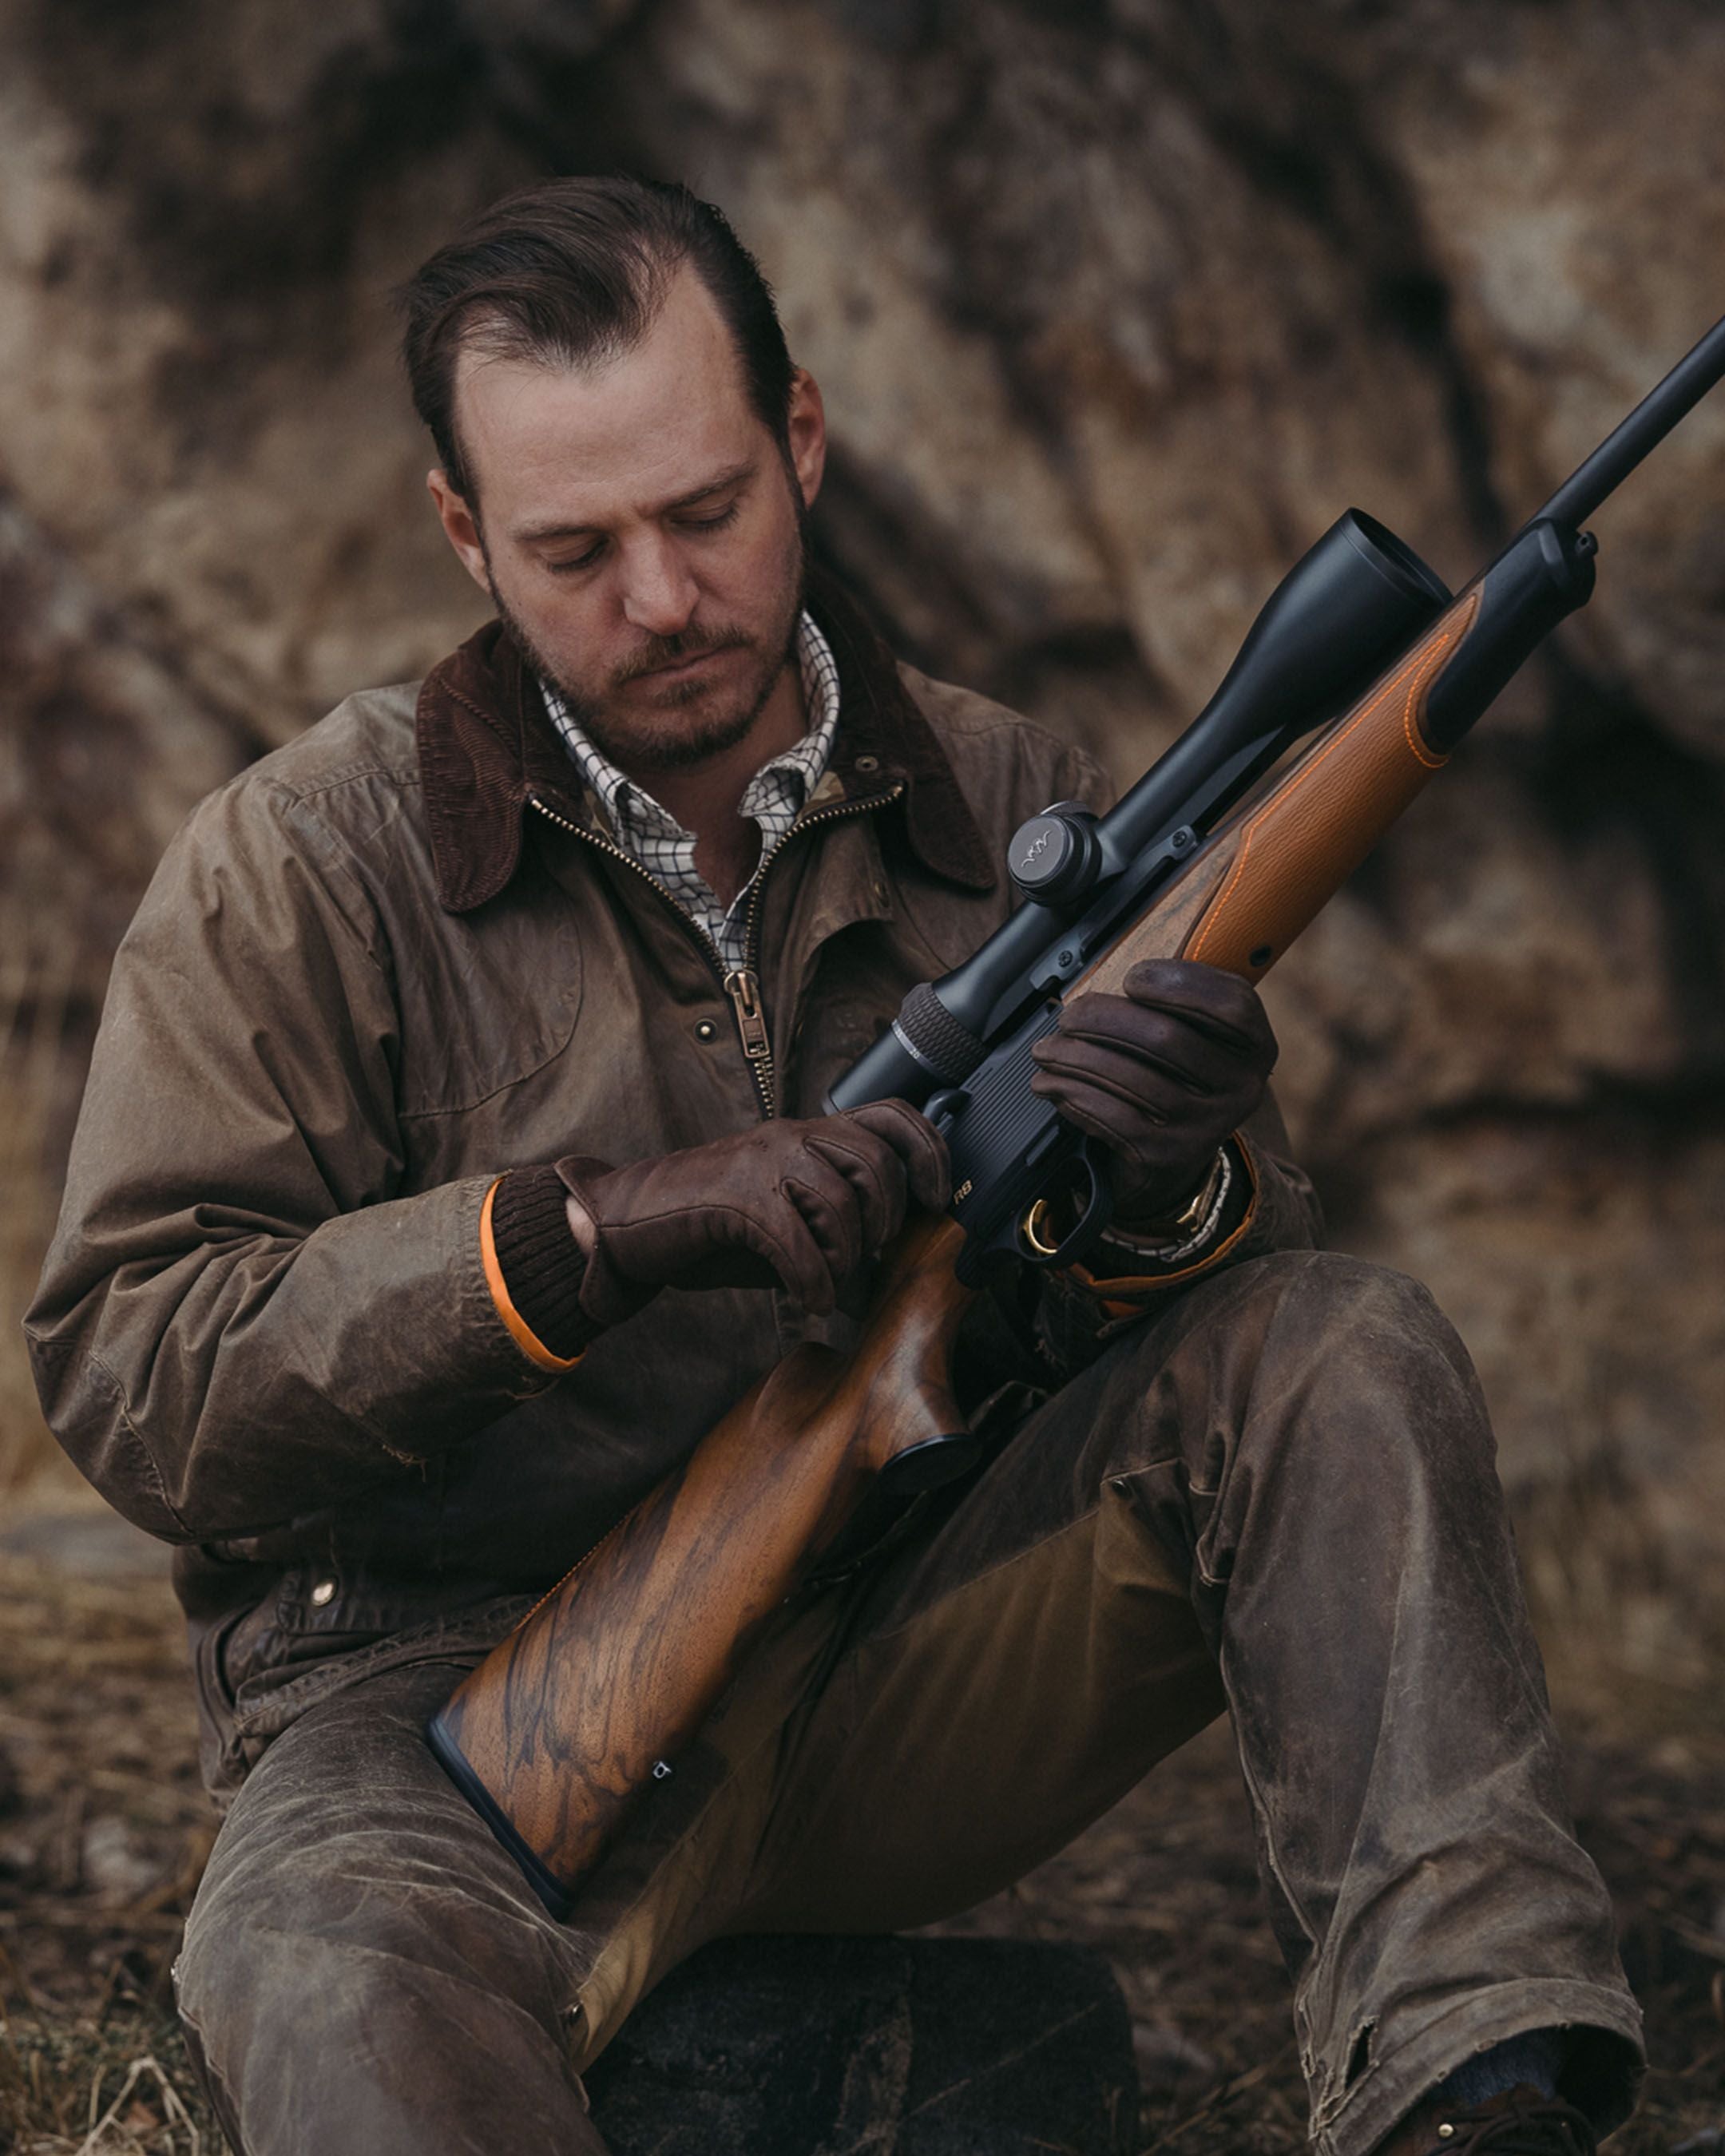 Buck & Ball x Blaser Release the New Signature R8 Hunting Rifle